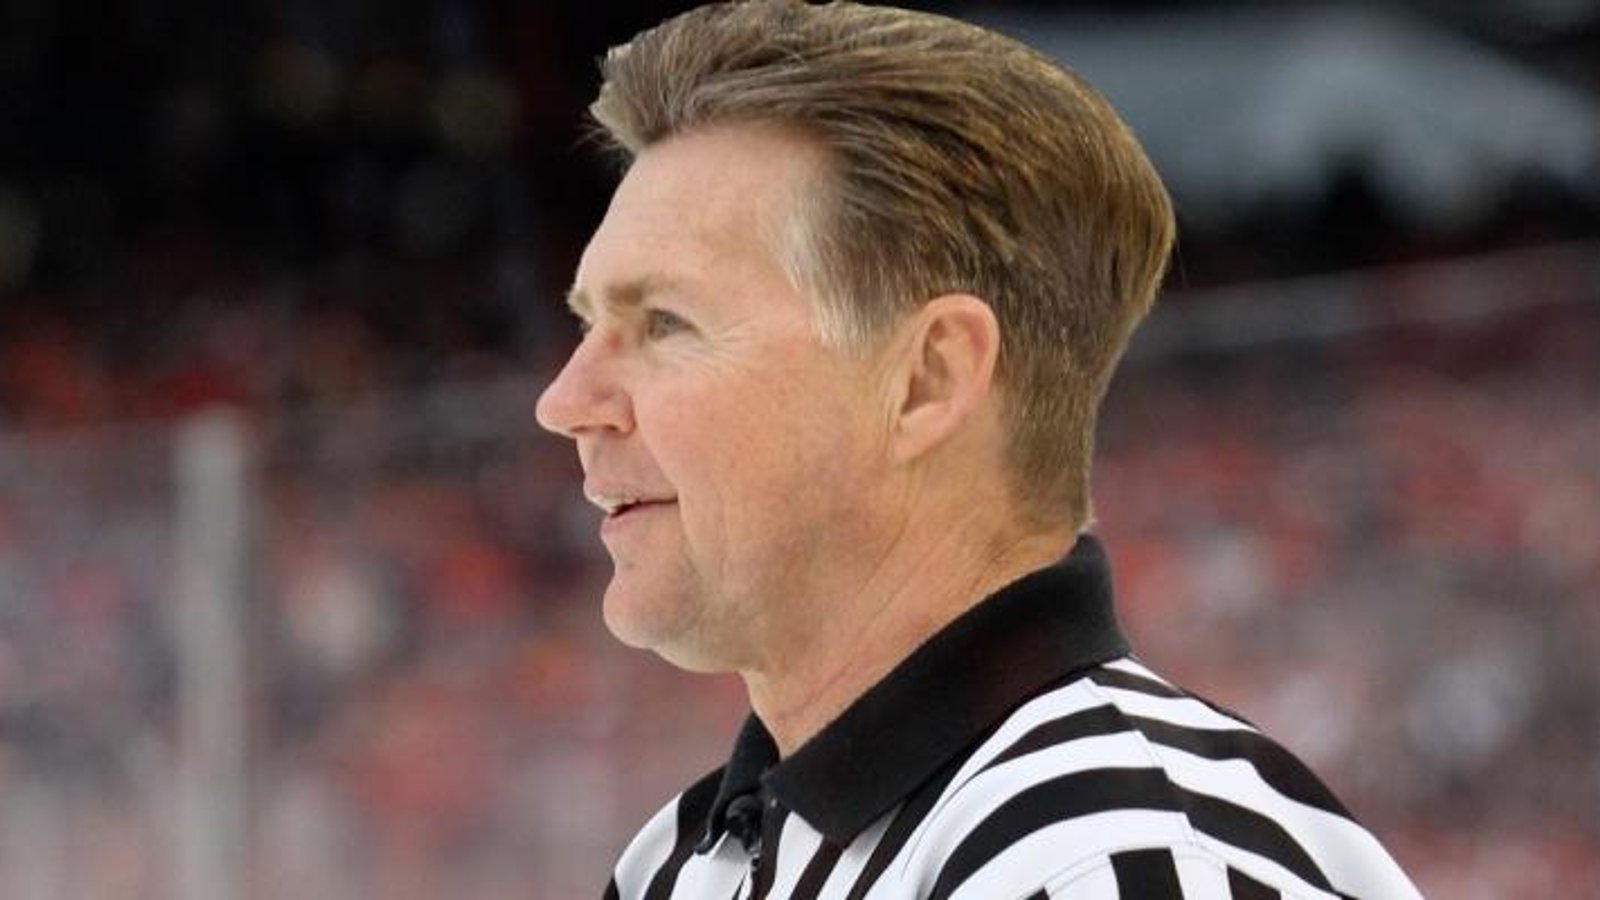 NHL referee received a death threat from NHL superstar.